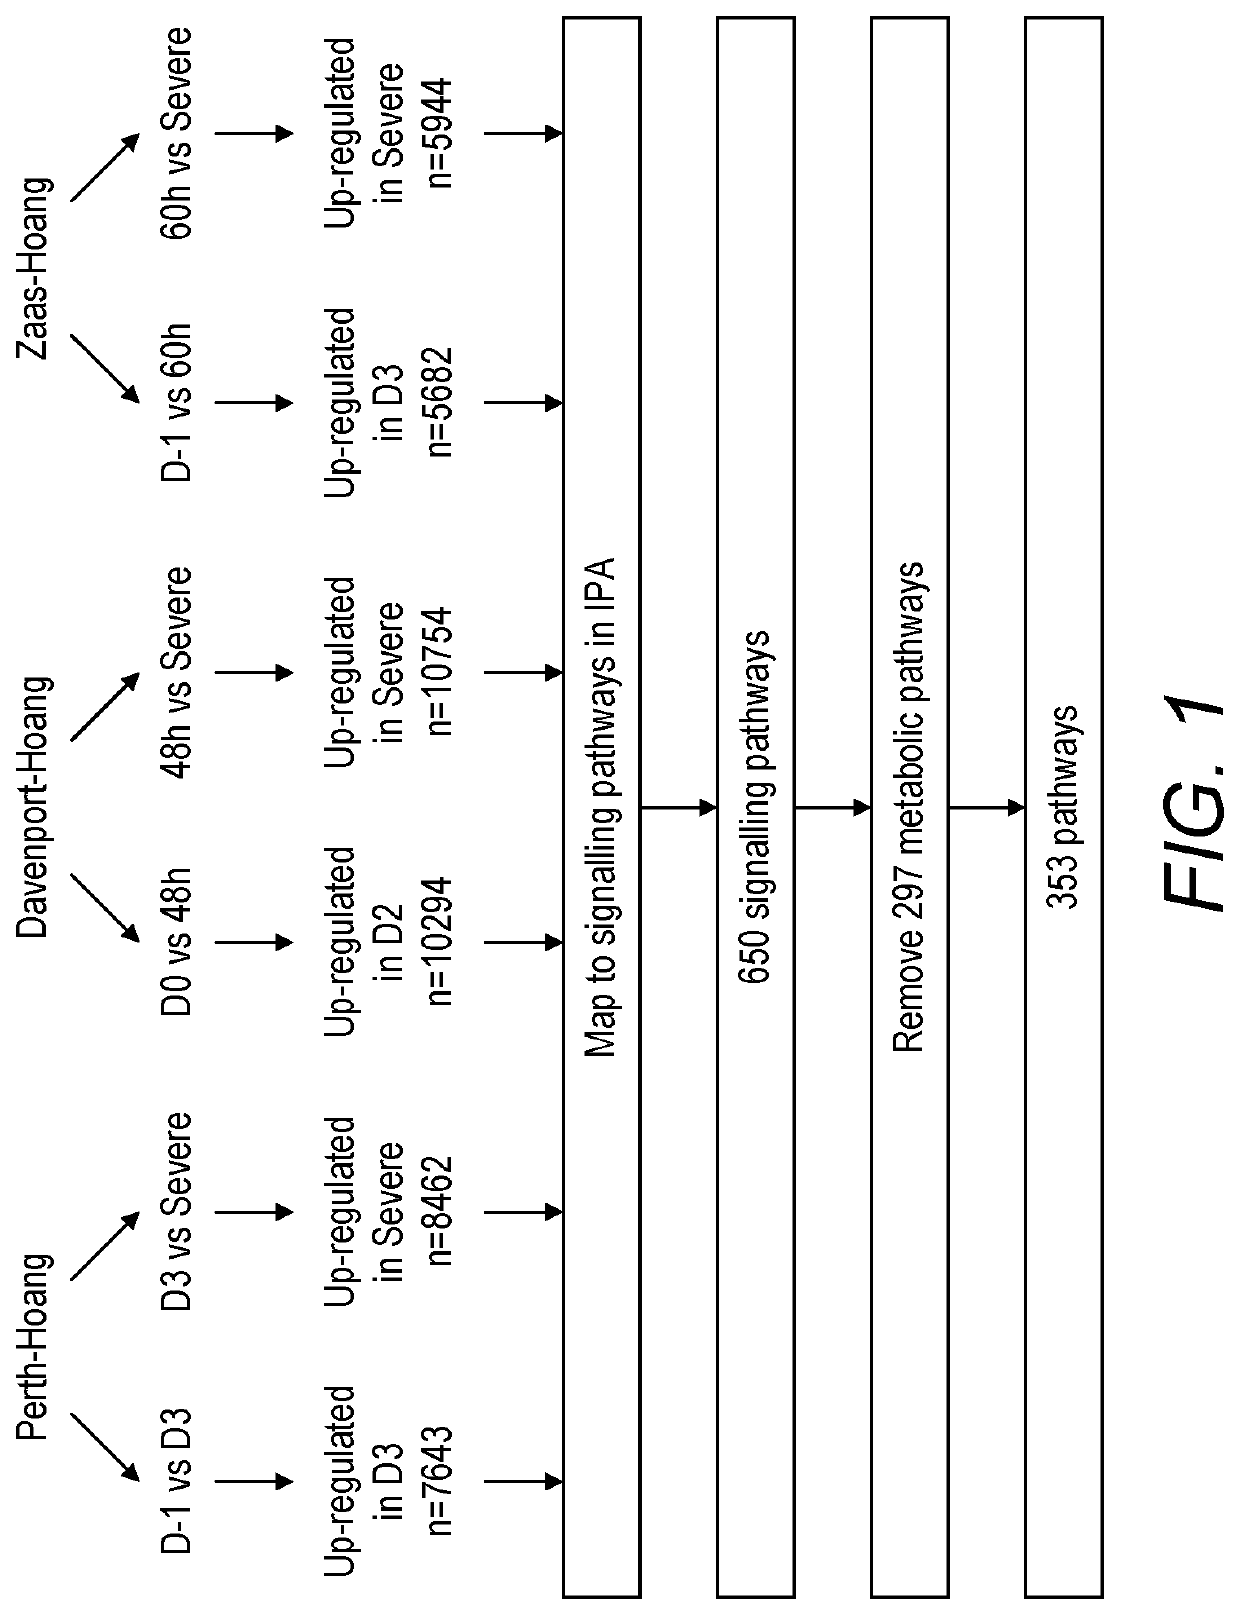 Methods and compounds for the treatment or prevention of severe influenza